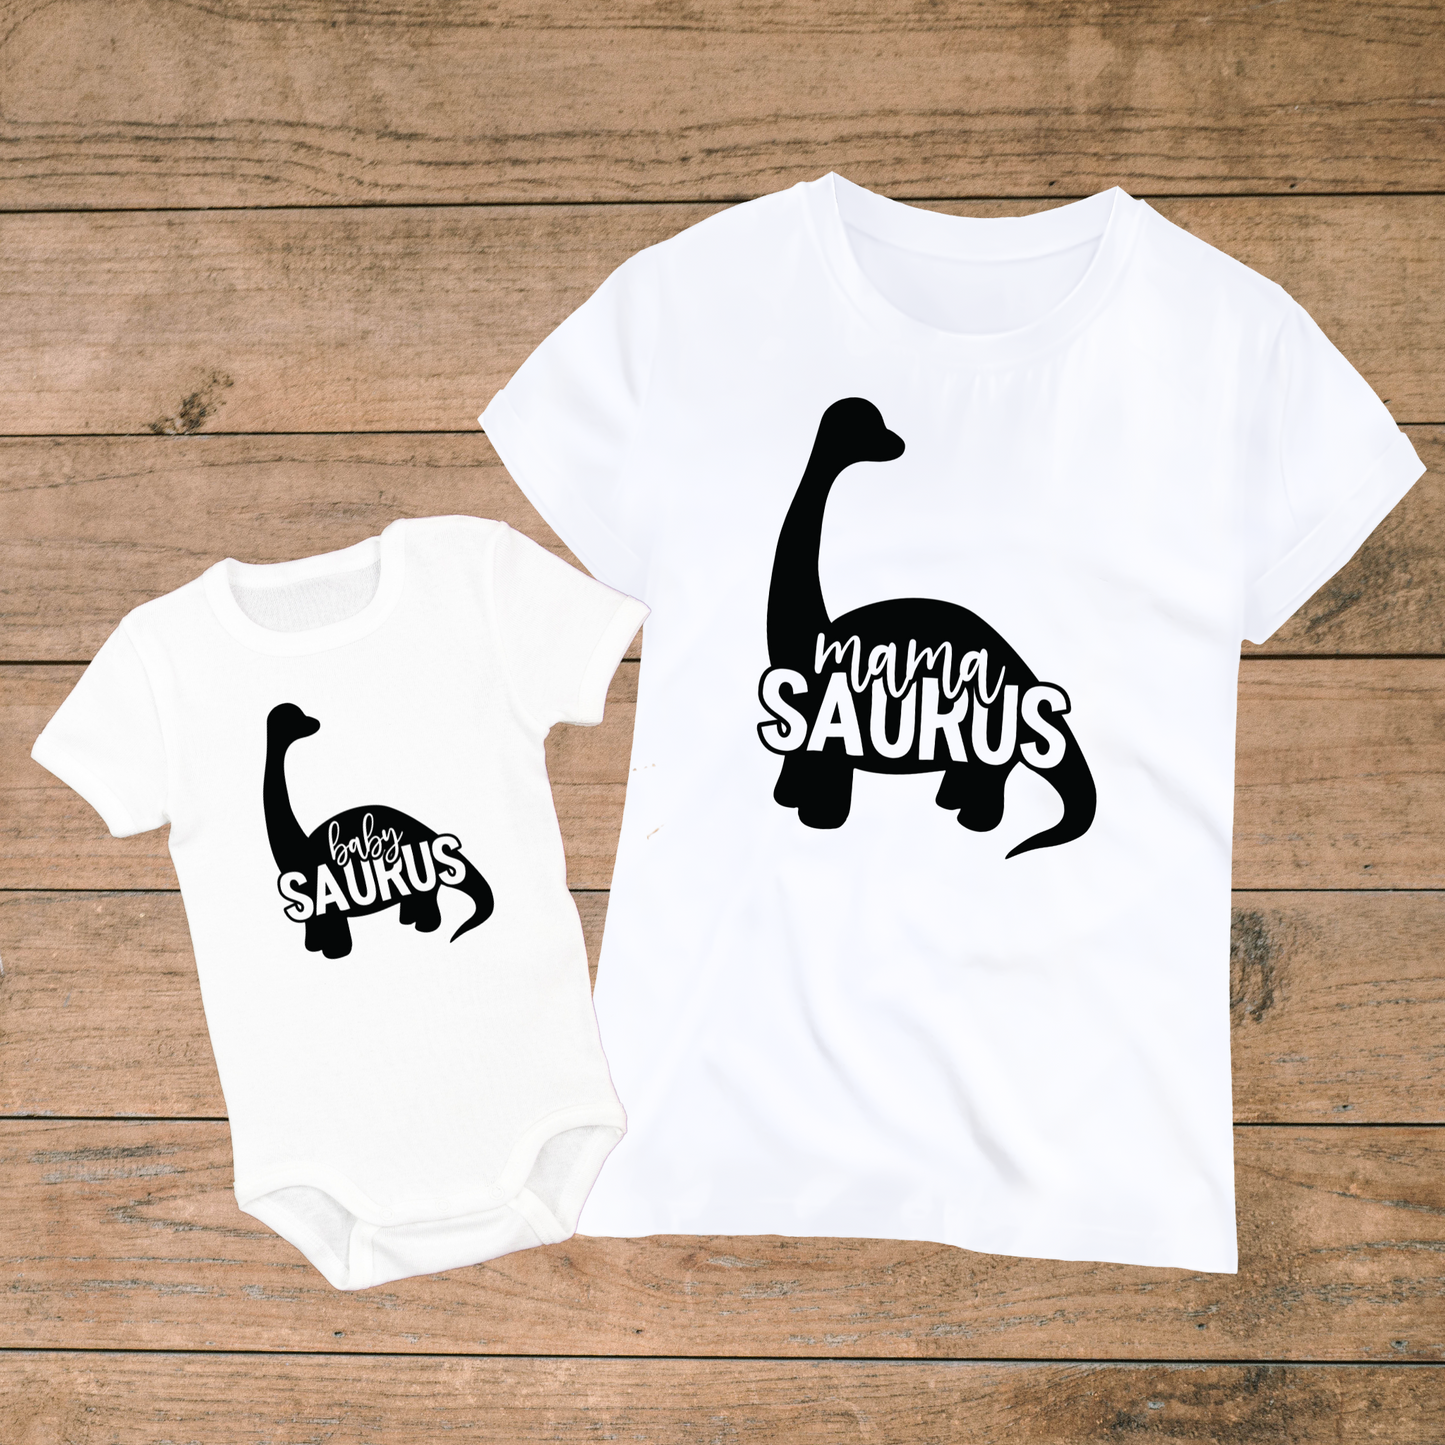 Mama and Baby Saurus - Mother Baby Matching Outfits